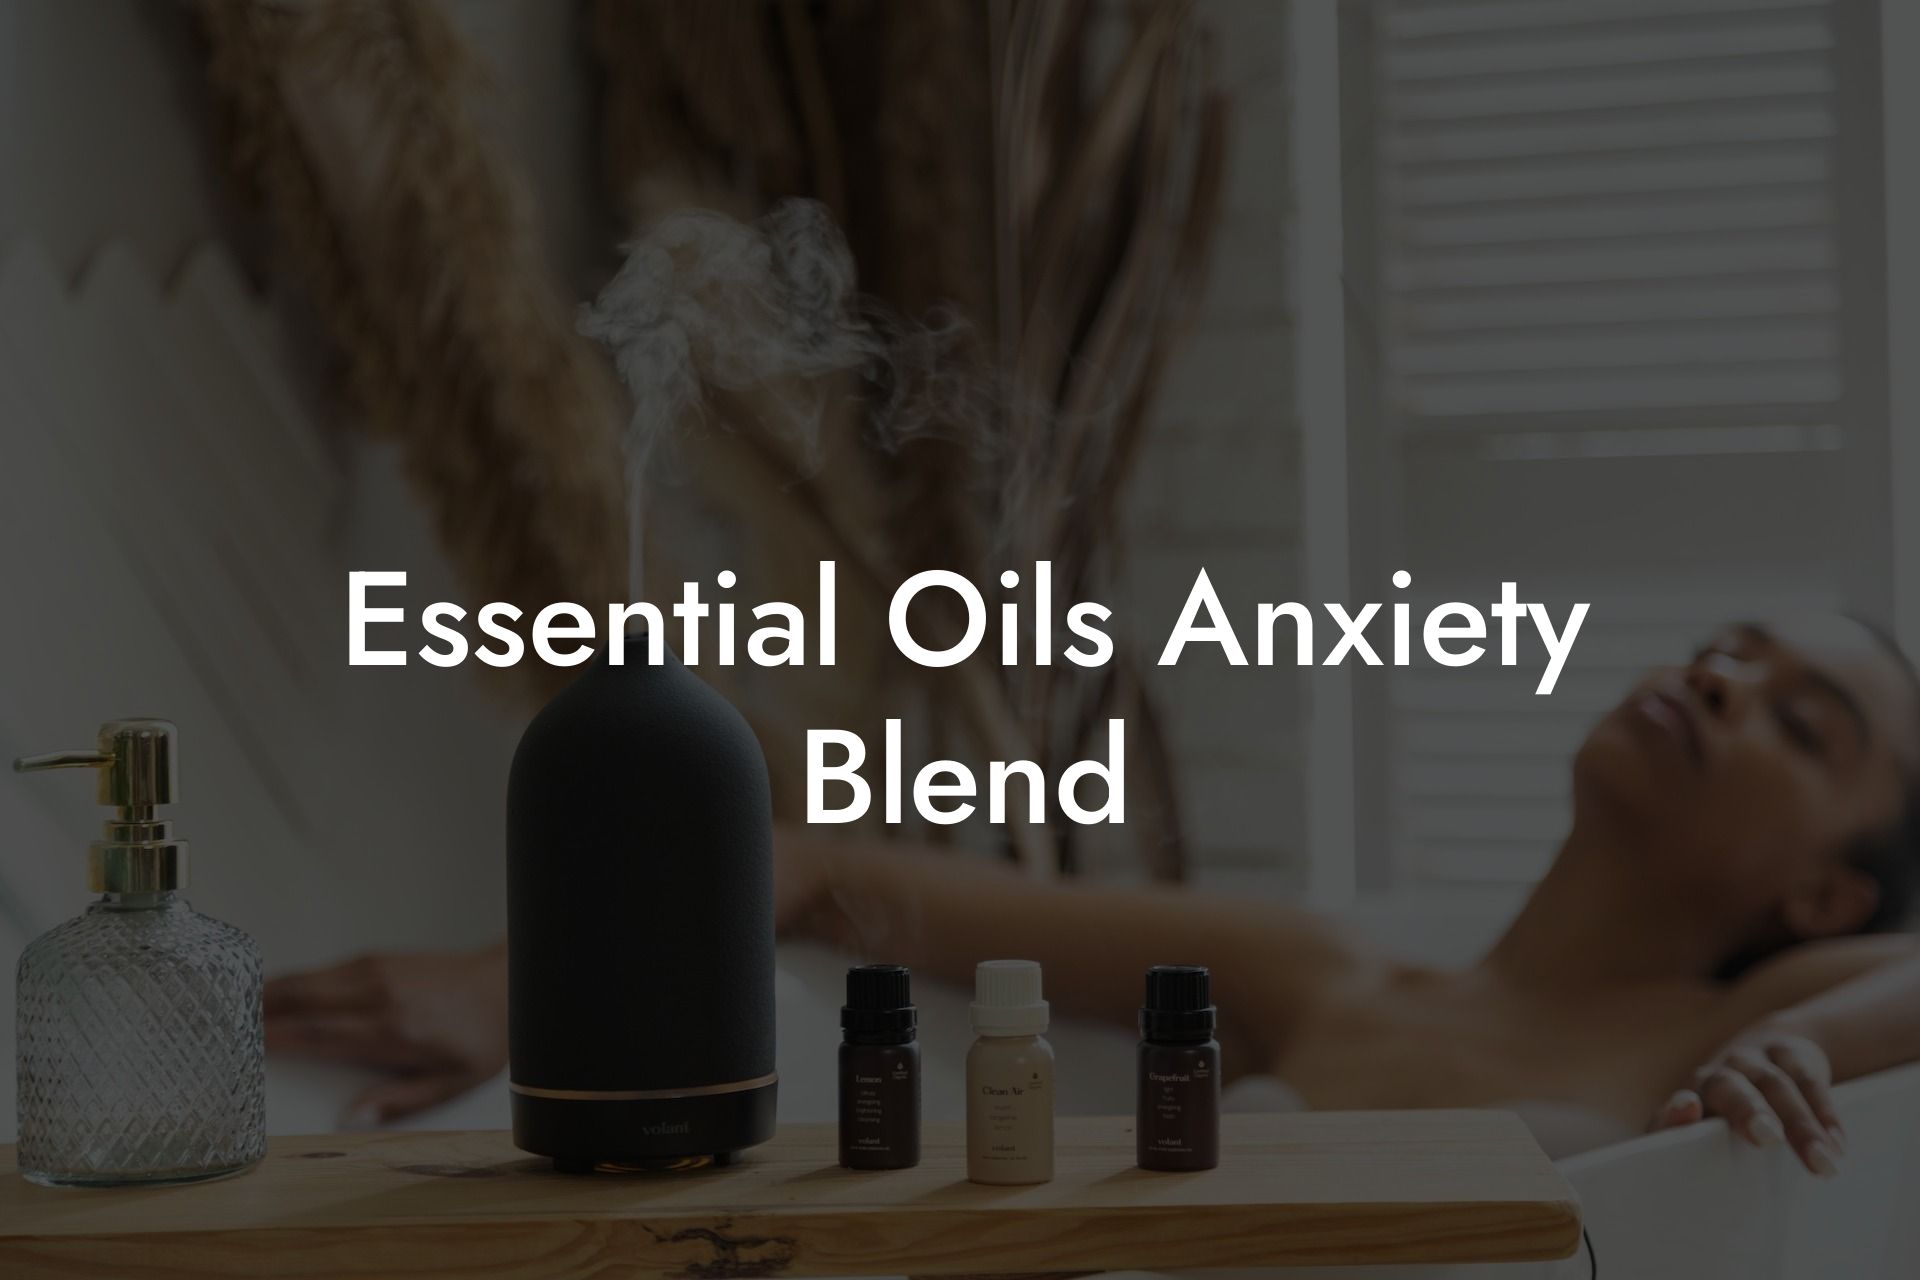 Essential Oils Anxiety Blend